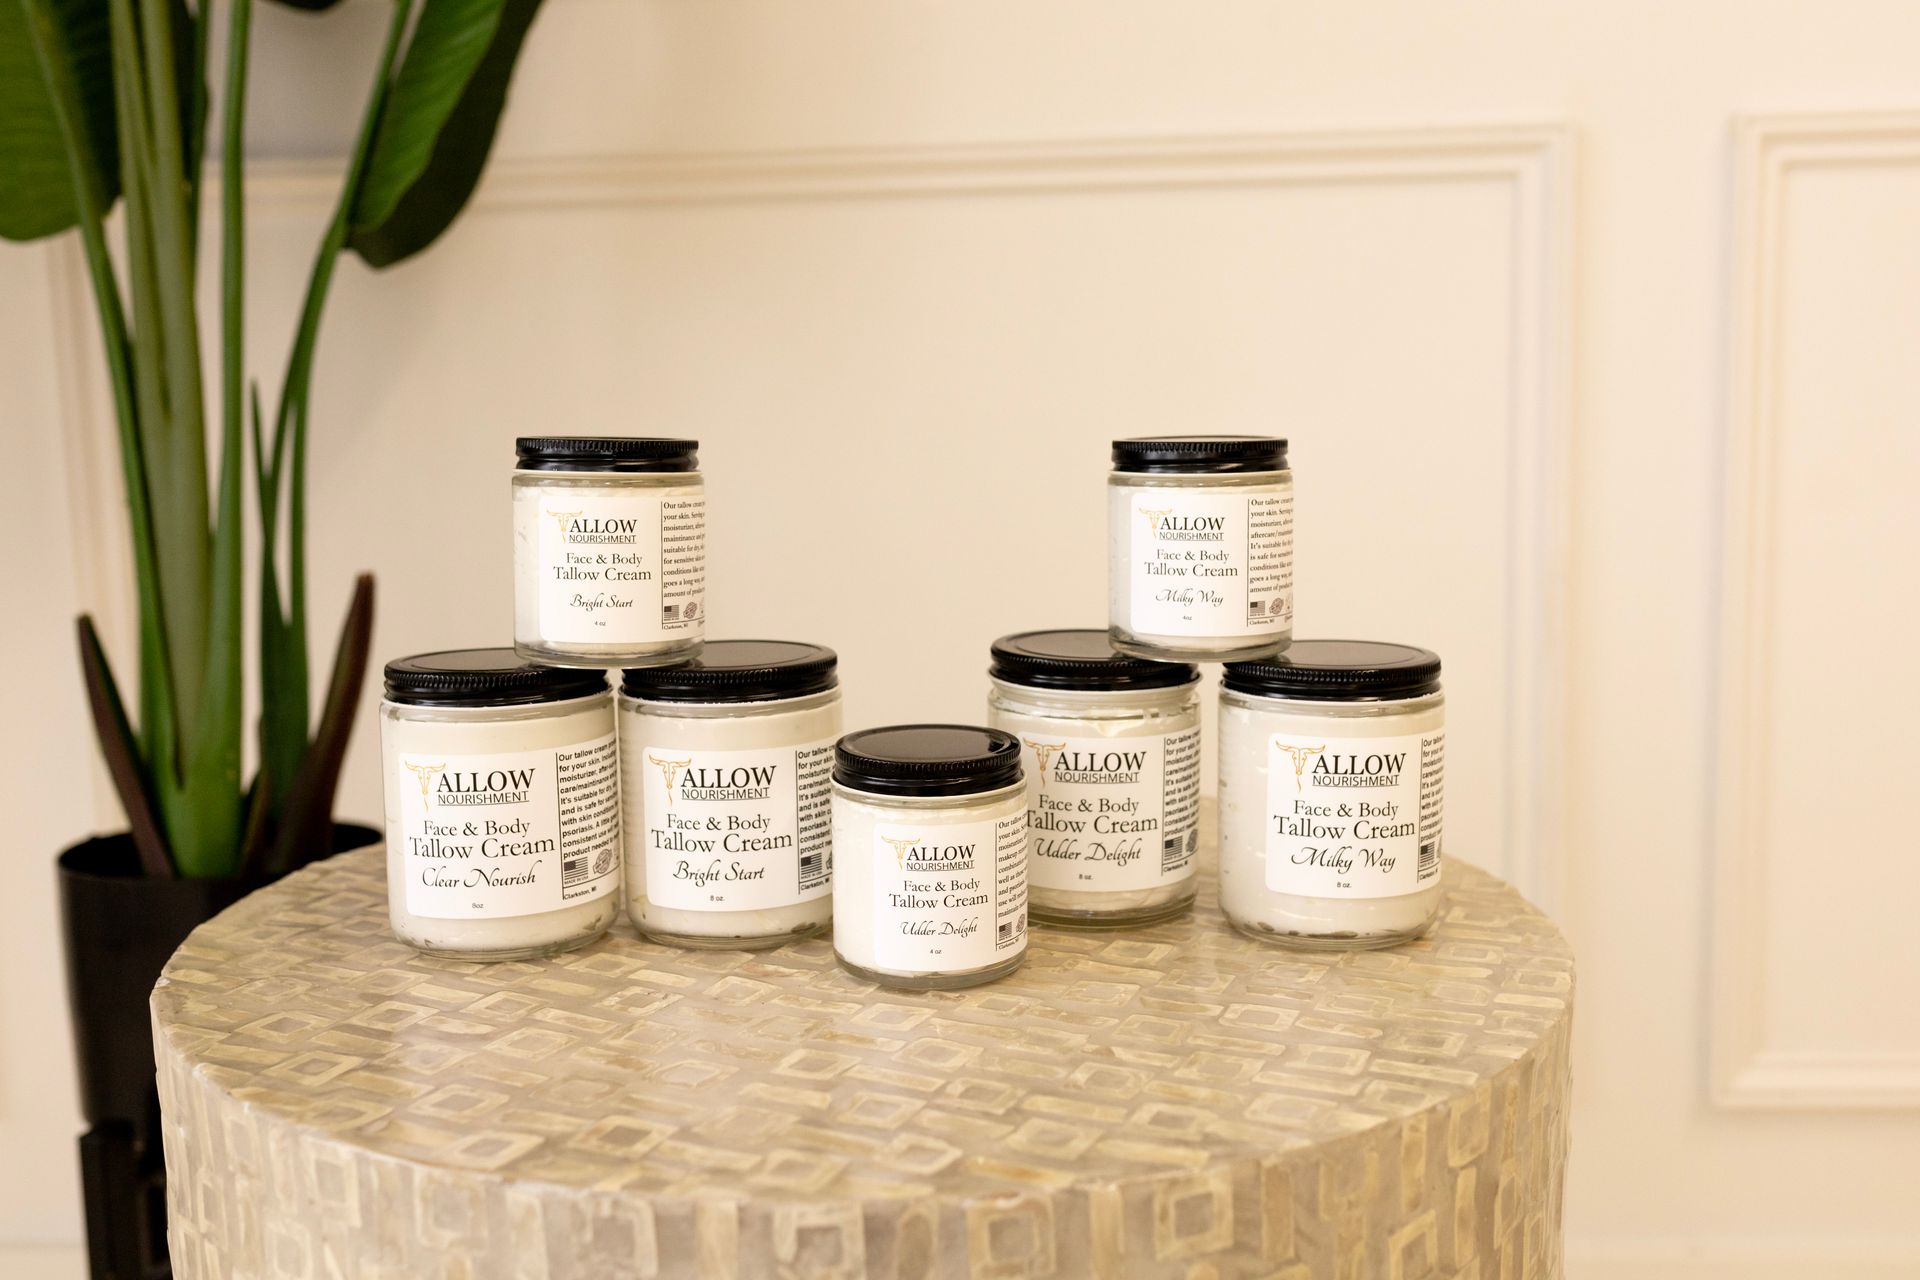 several jars of allow nourishment's skincare products are on a table